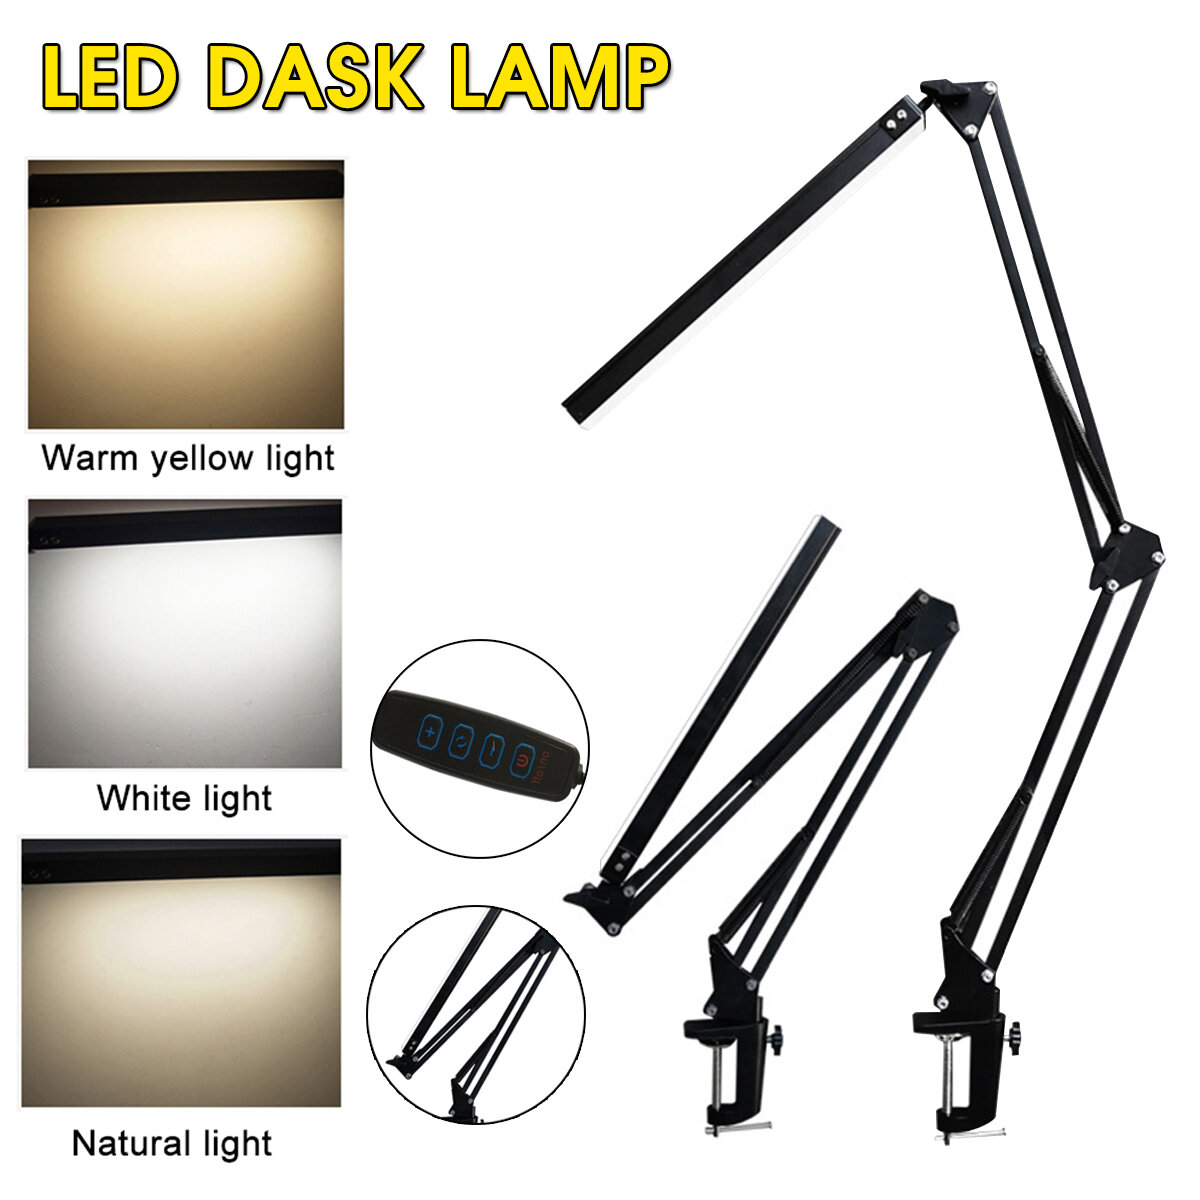 

360° Rotated Flexible LED USB Desk Lamp with Clamp Base for Reading Study 10 Levels Dimmable White/Warm/Natural Light